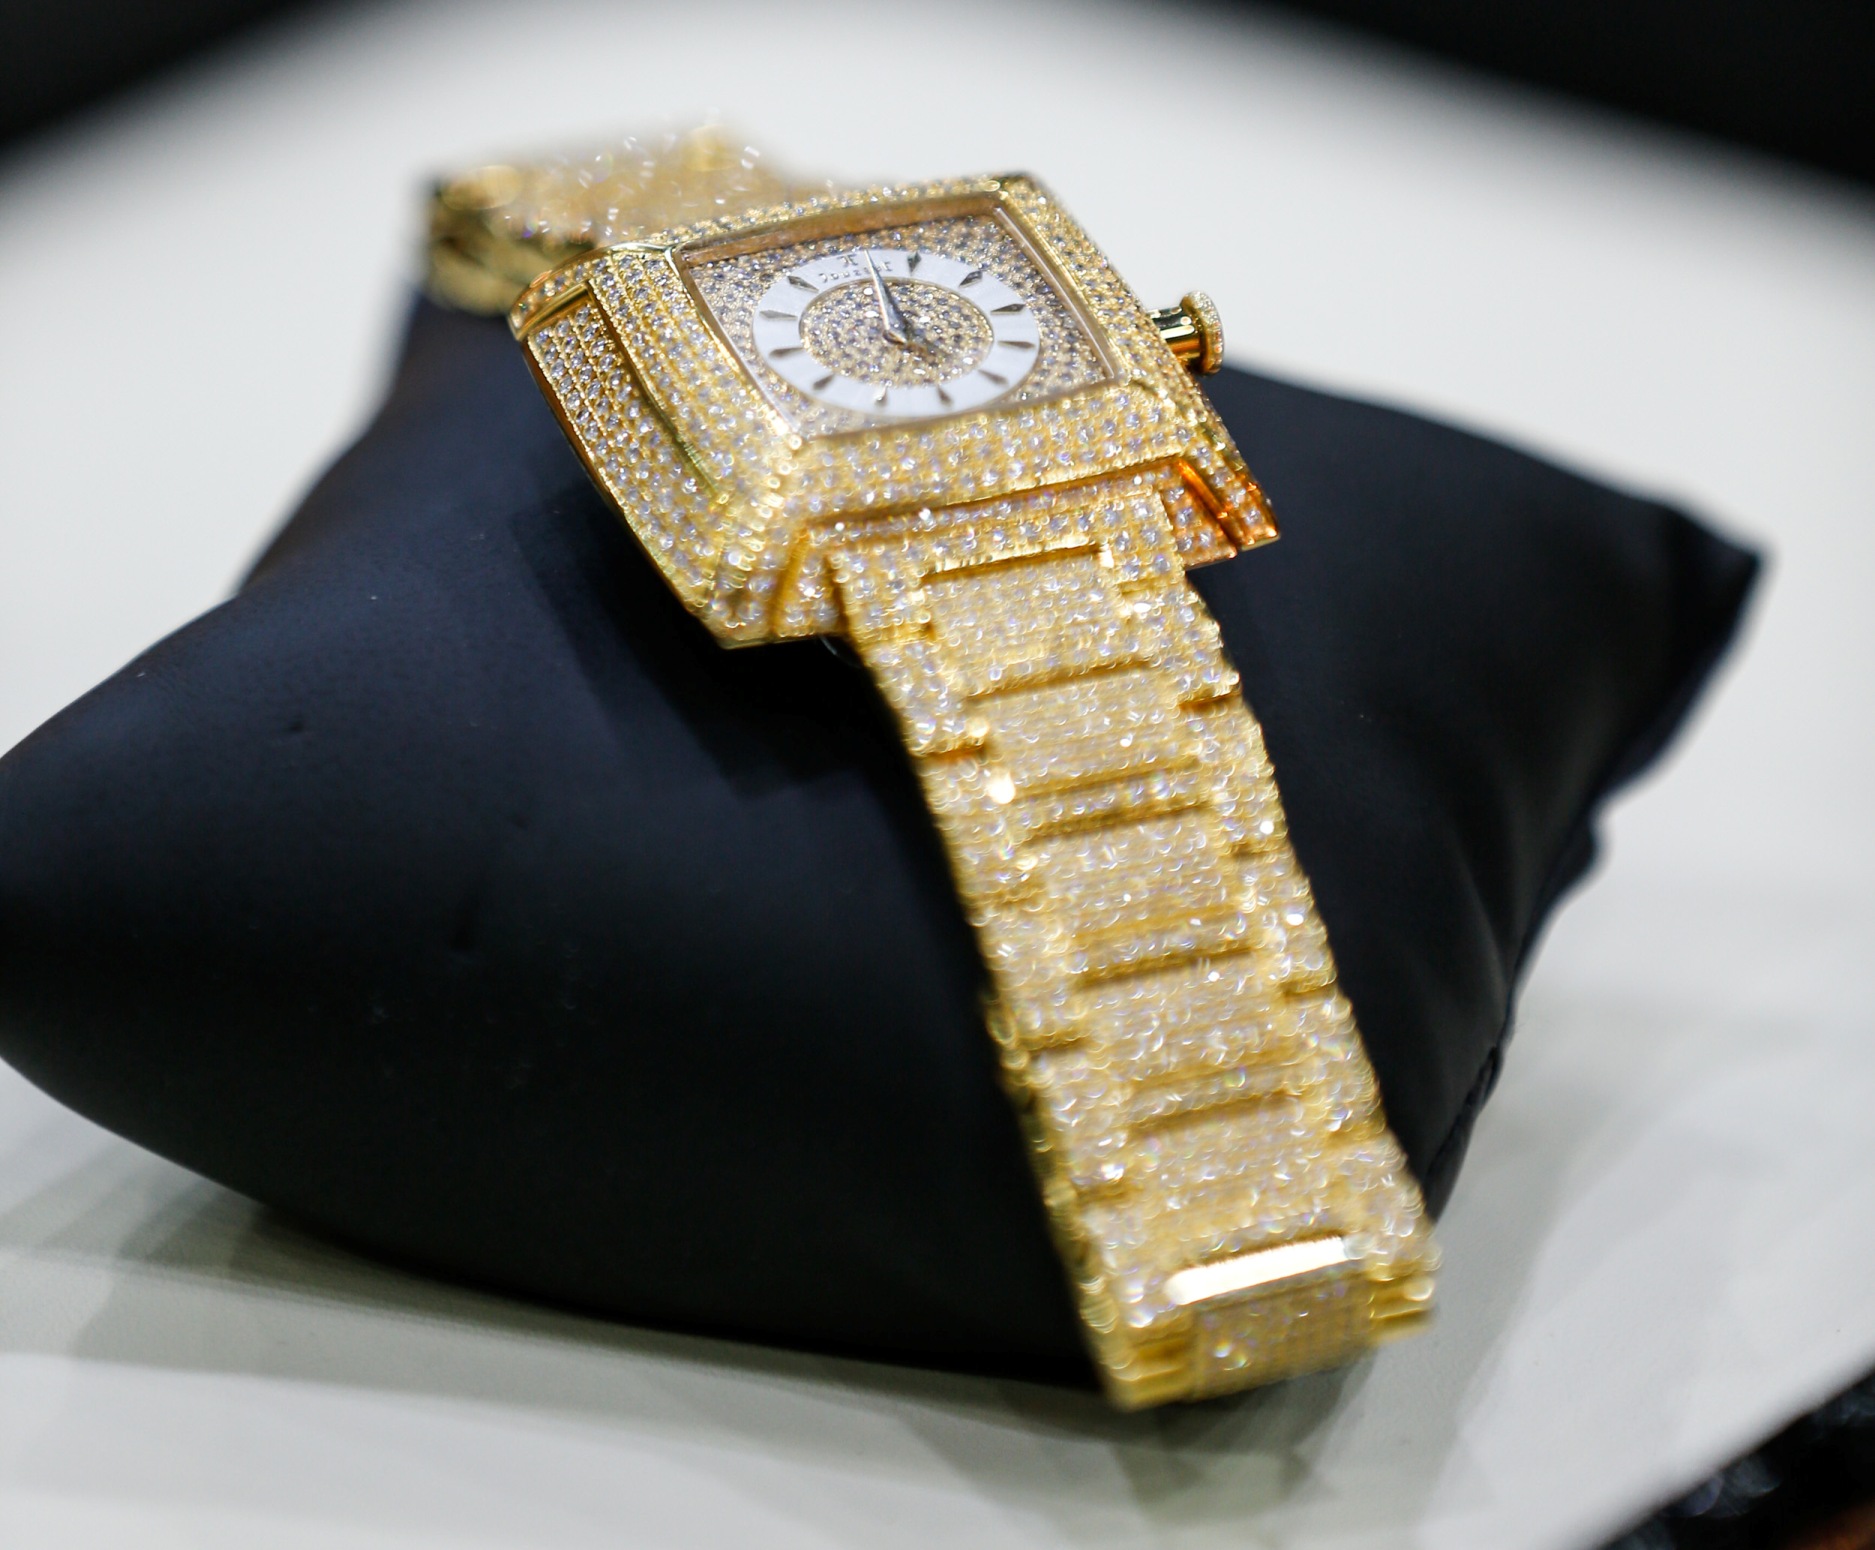 A dazzling Swiss made watch from Al Daham with sparkling diamonds retails for AED 43,000.  